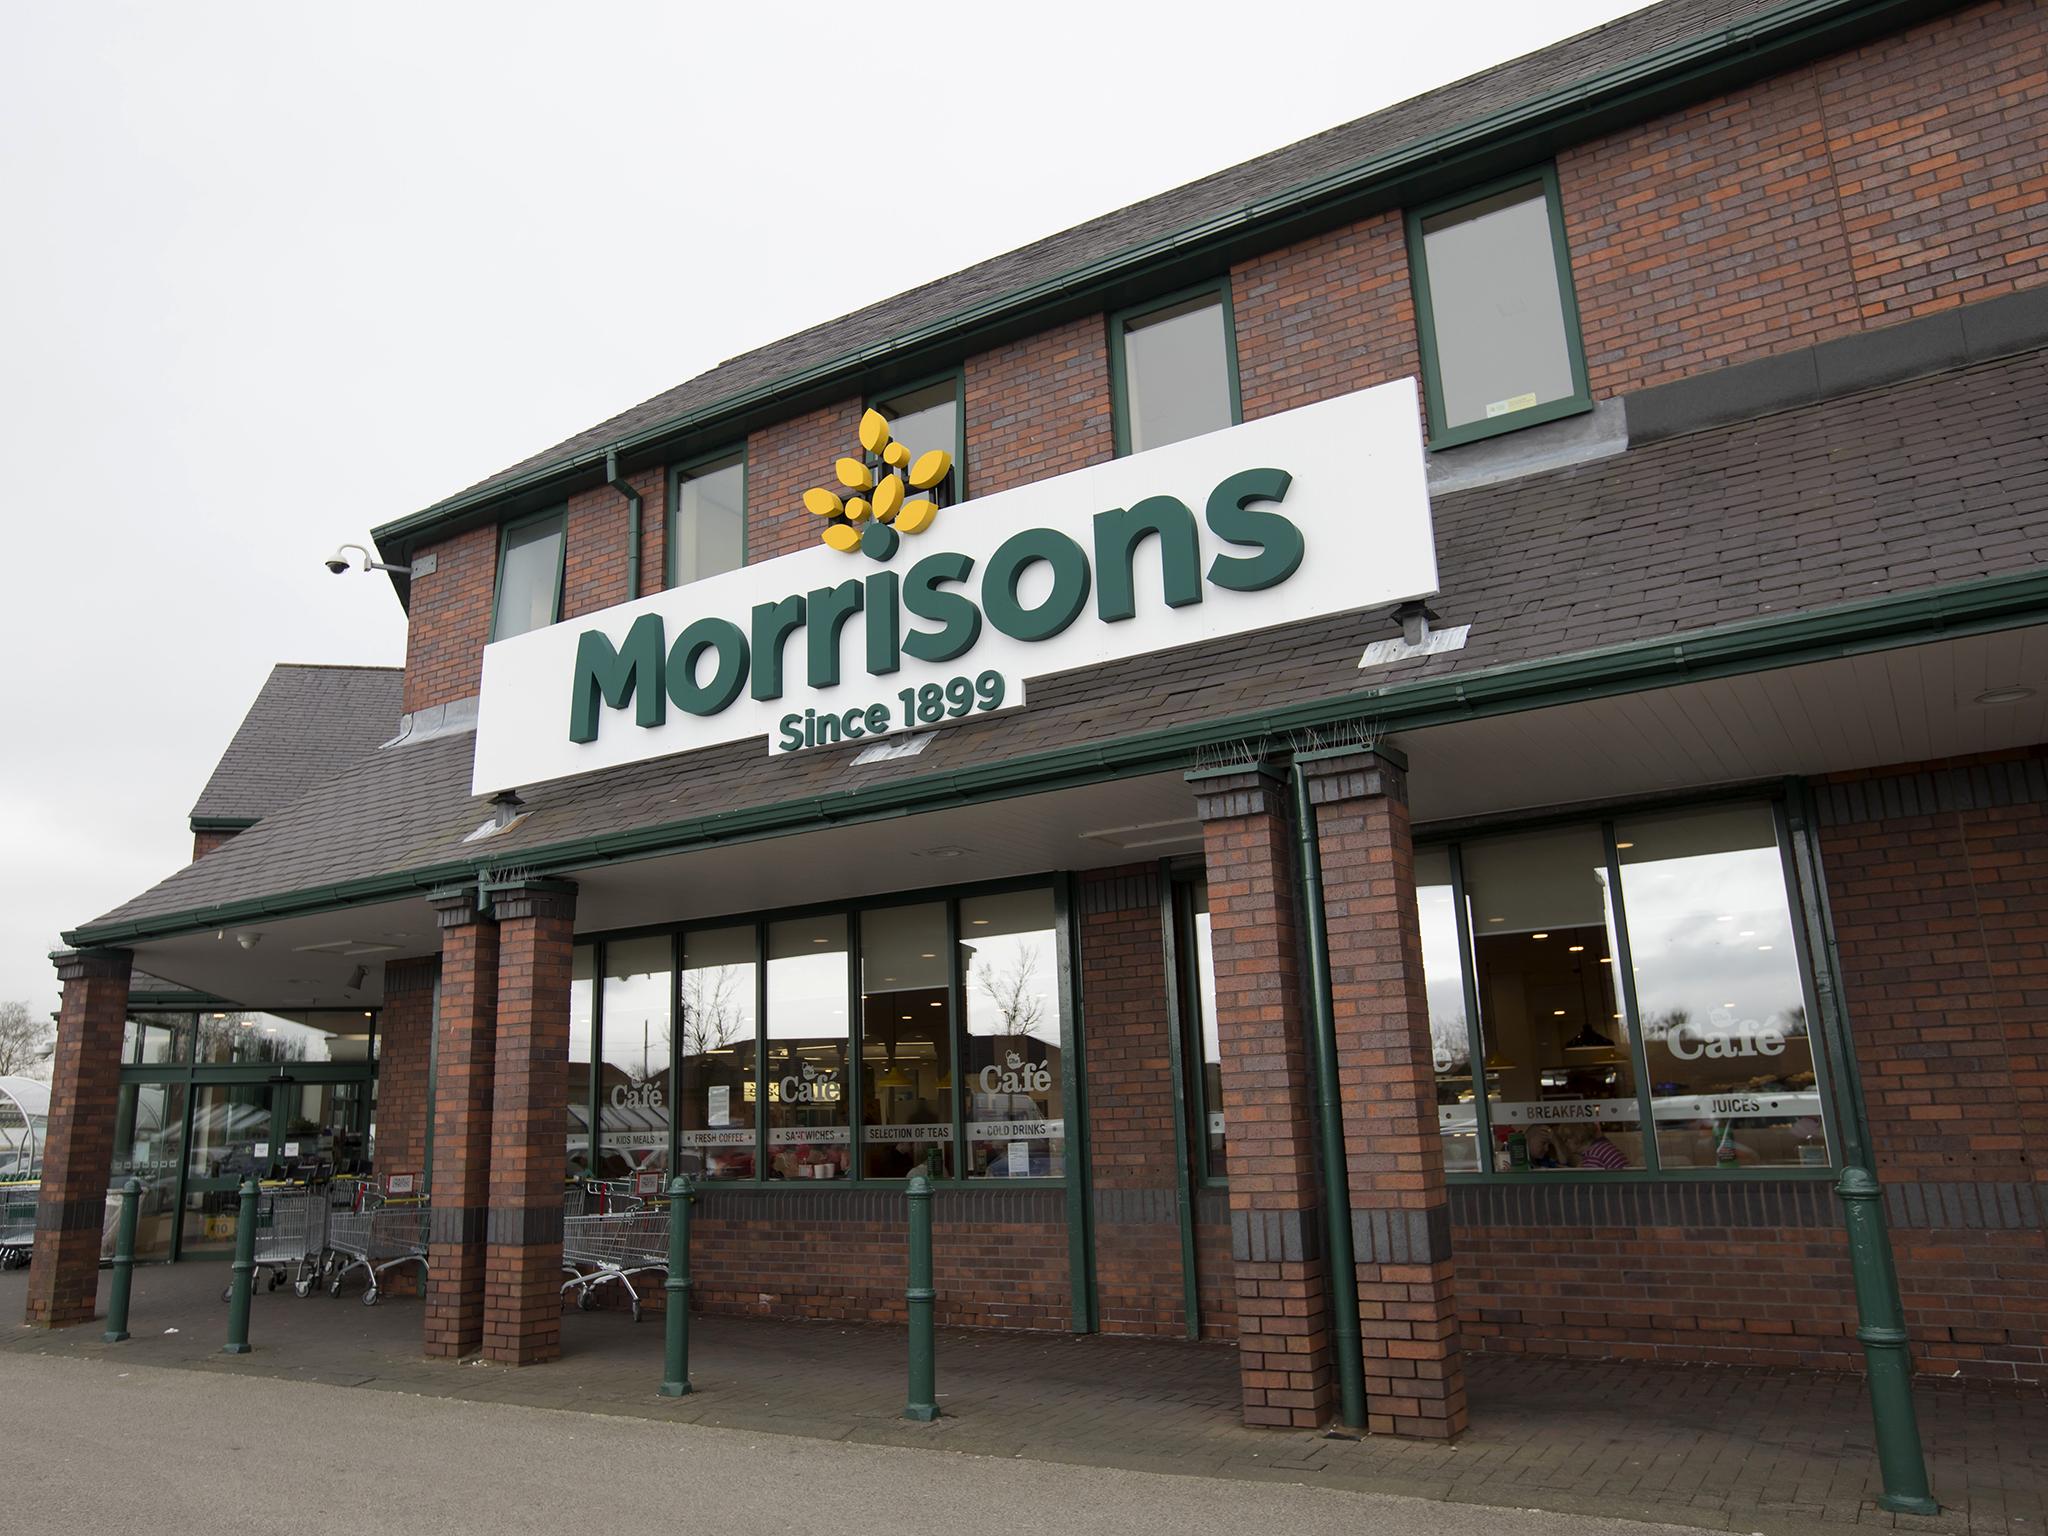 Morrisons has reported fall sales